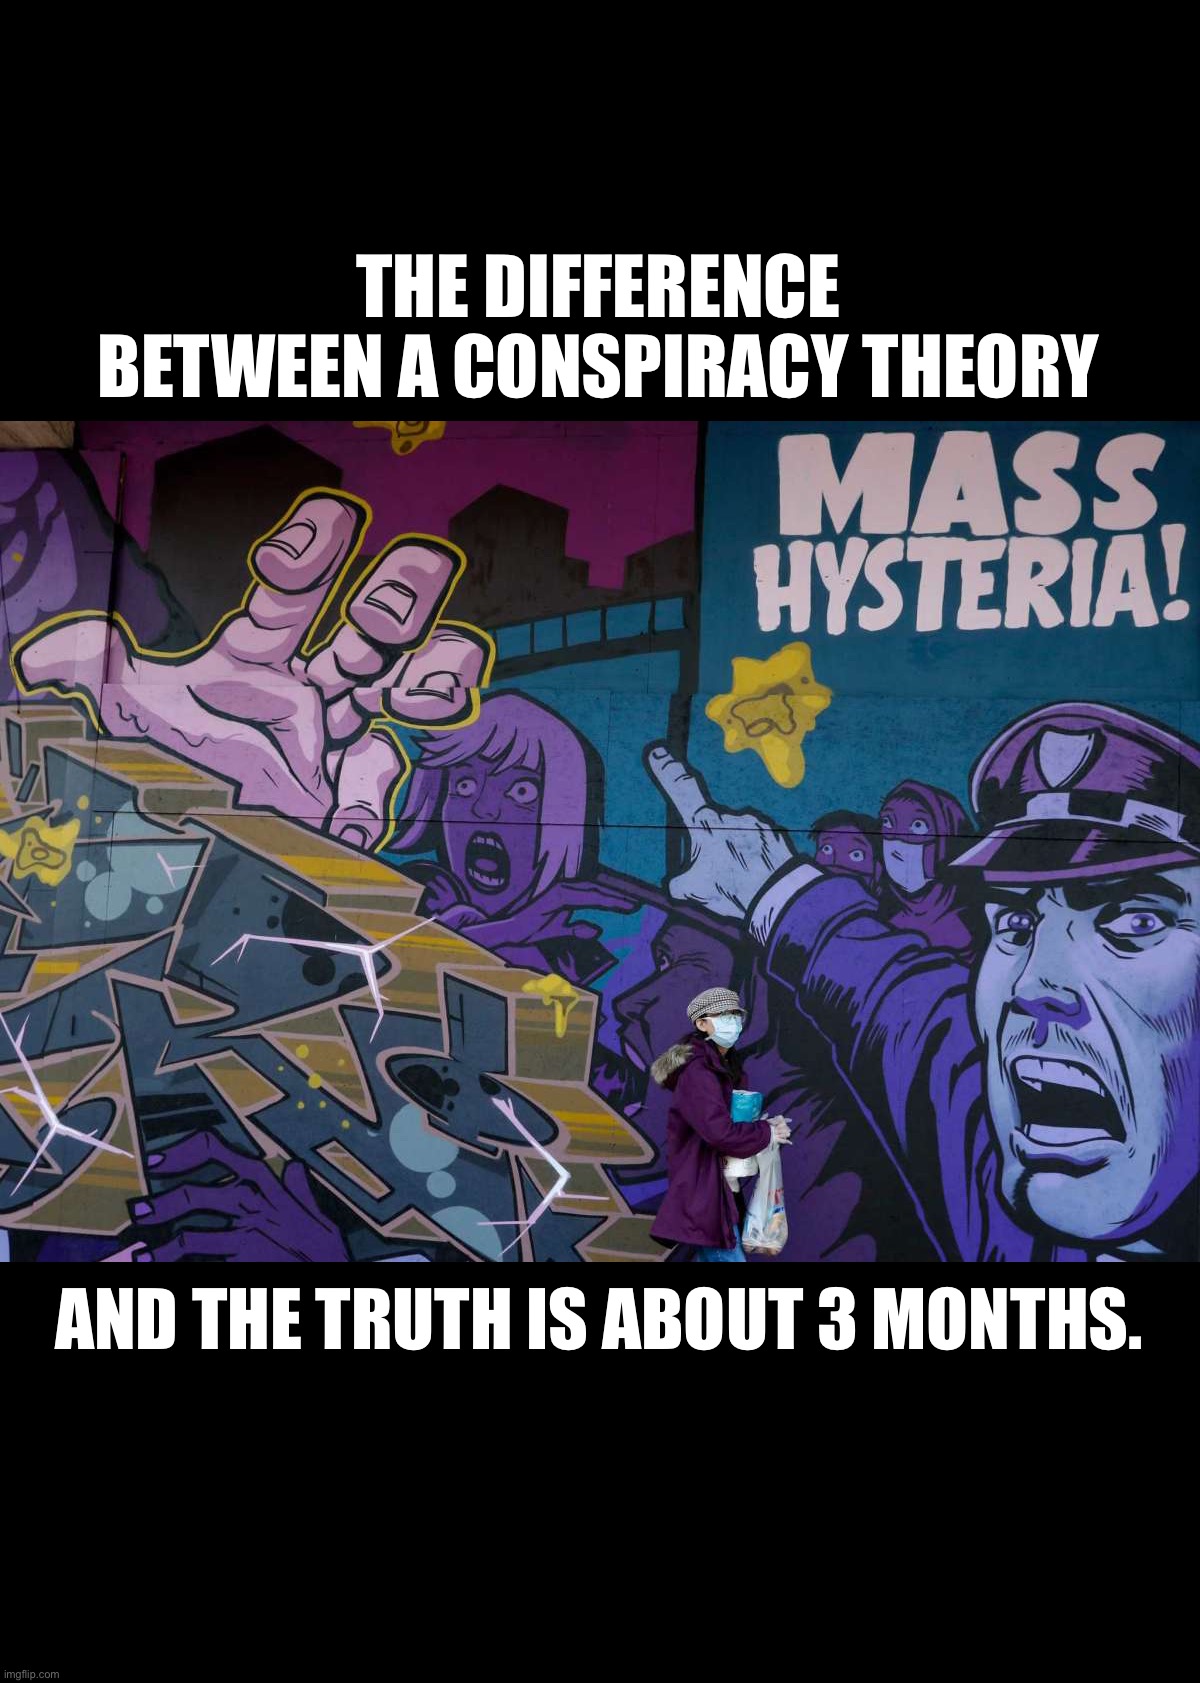 THE DIFFERENCE BETWEEN A CONSPIRACY THEORY; AND THE TRUTH IS ABOUT 3 MONTHS. | image tagged in conspiracy theory,covid19,coronavirus,vaccines,vaccination,virus | made w/ Imgflip meme maker